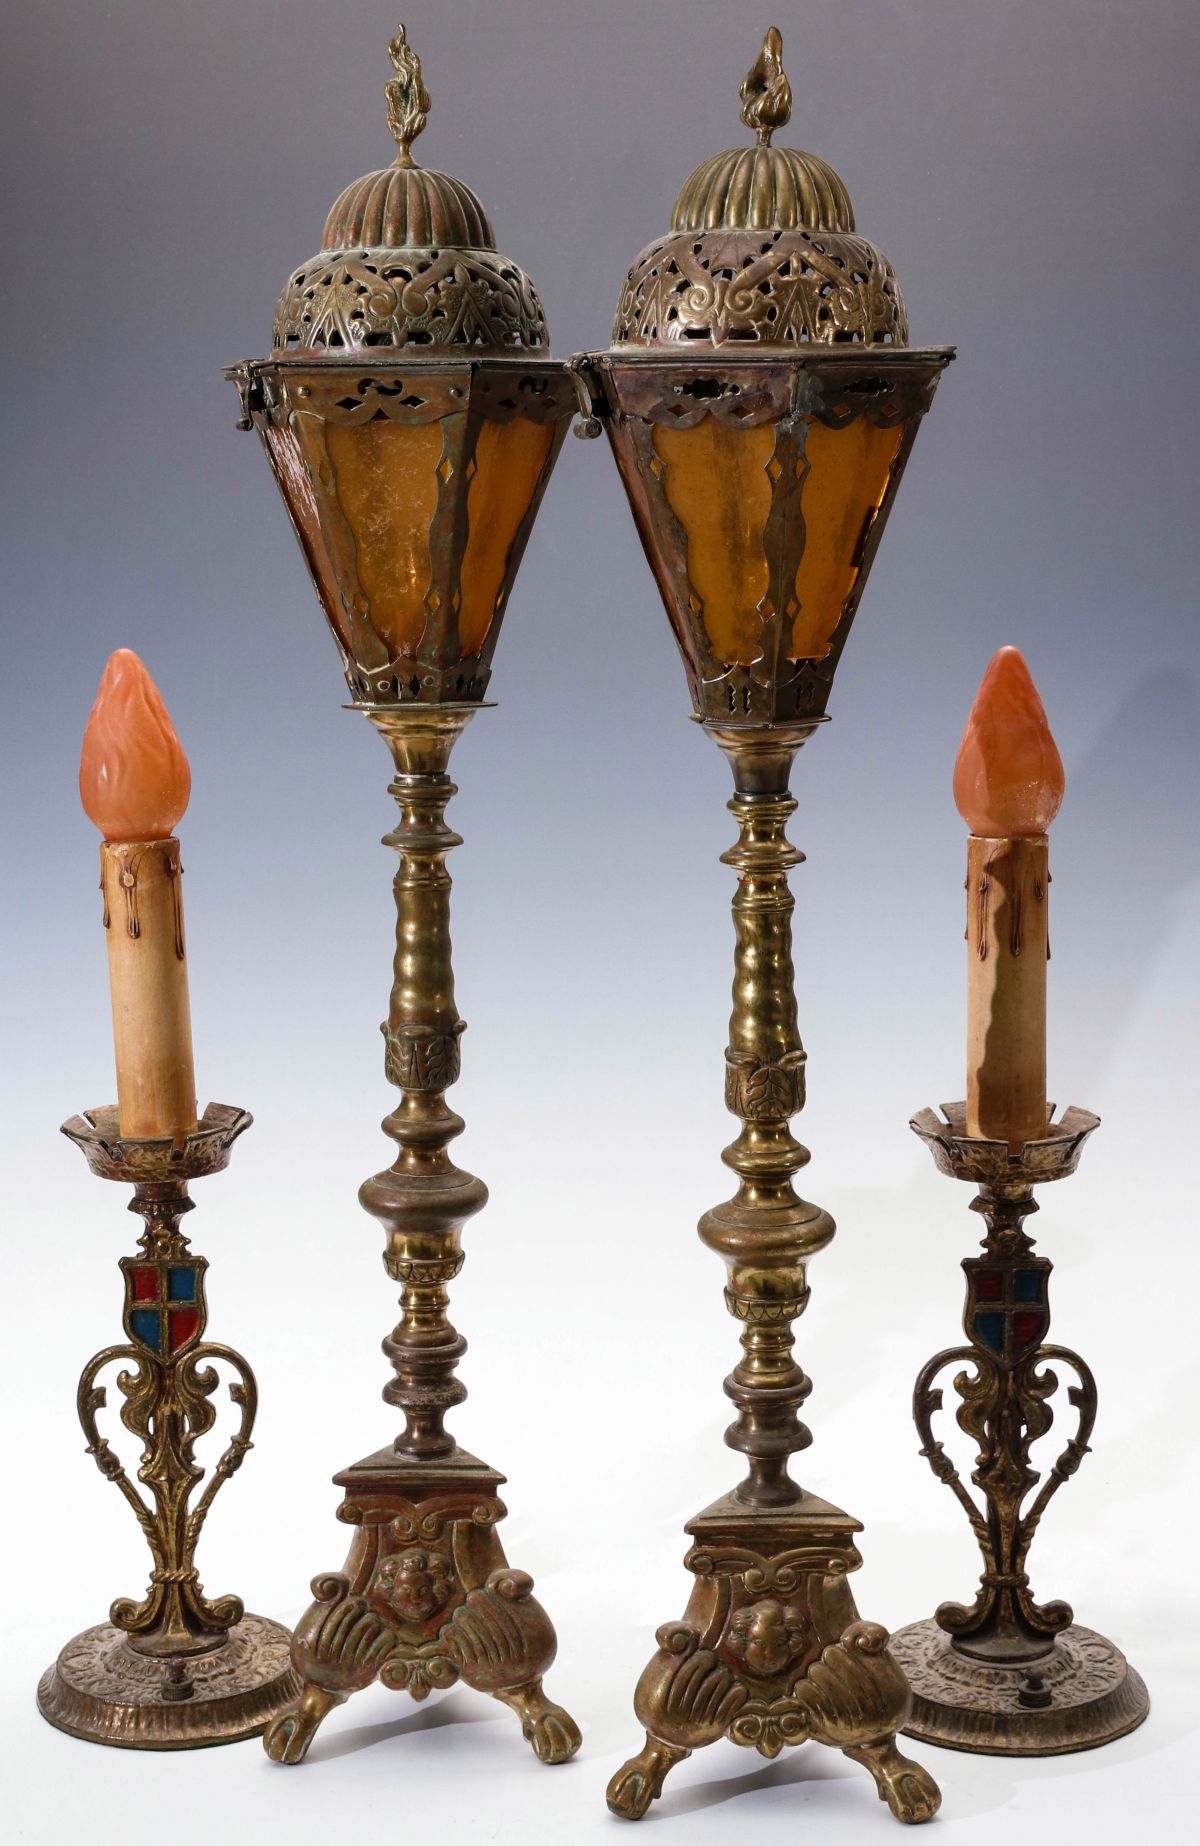 EARLY 20TH CENTURY BRASS ALTAR LIGHTS AND CANDLESTICKS